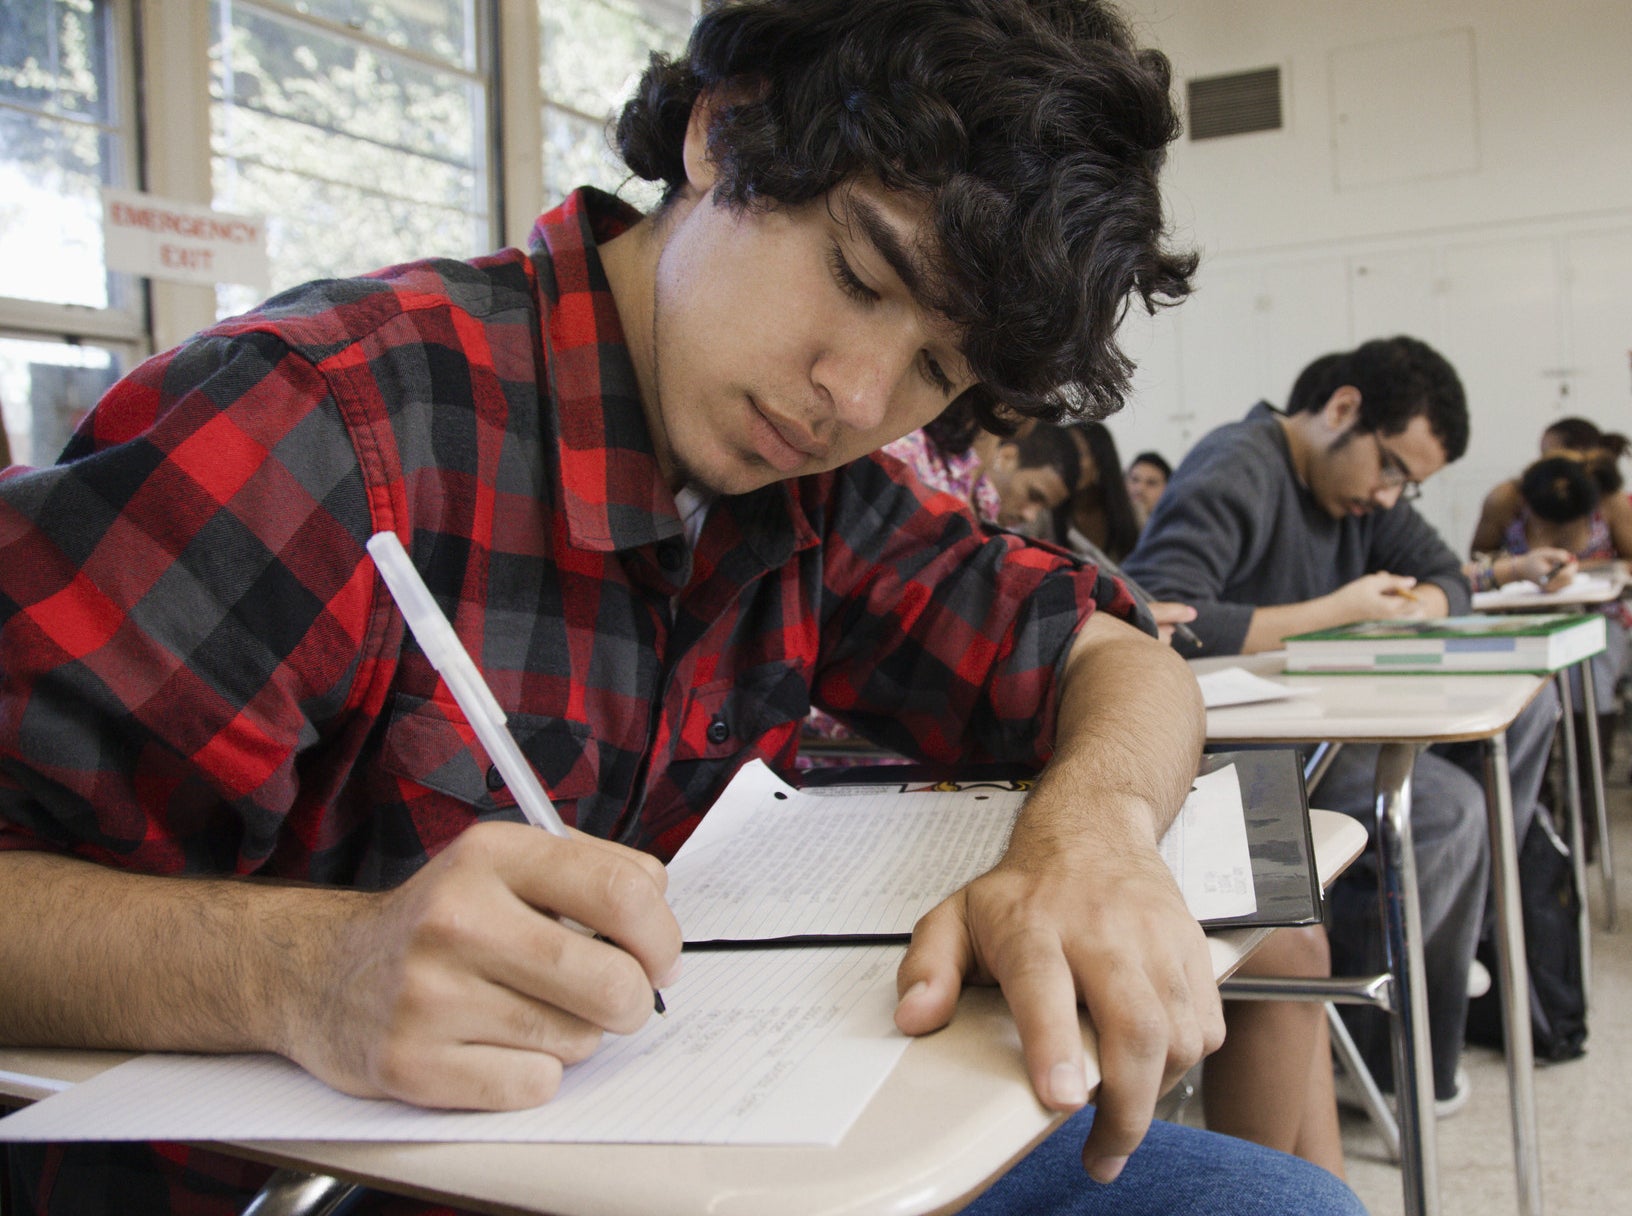 A Latinx student takes a test among other students in the classroom